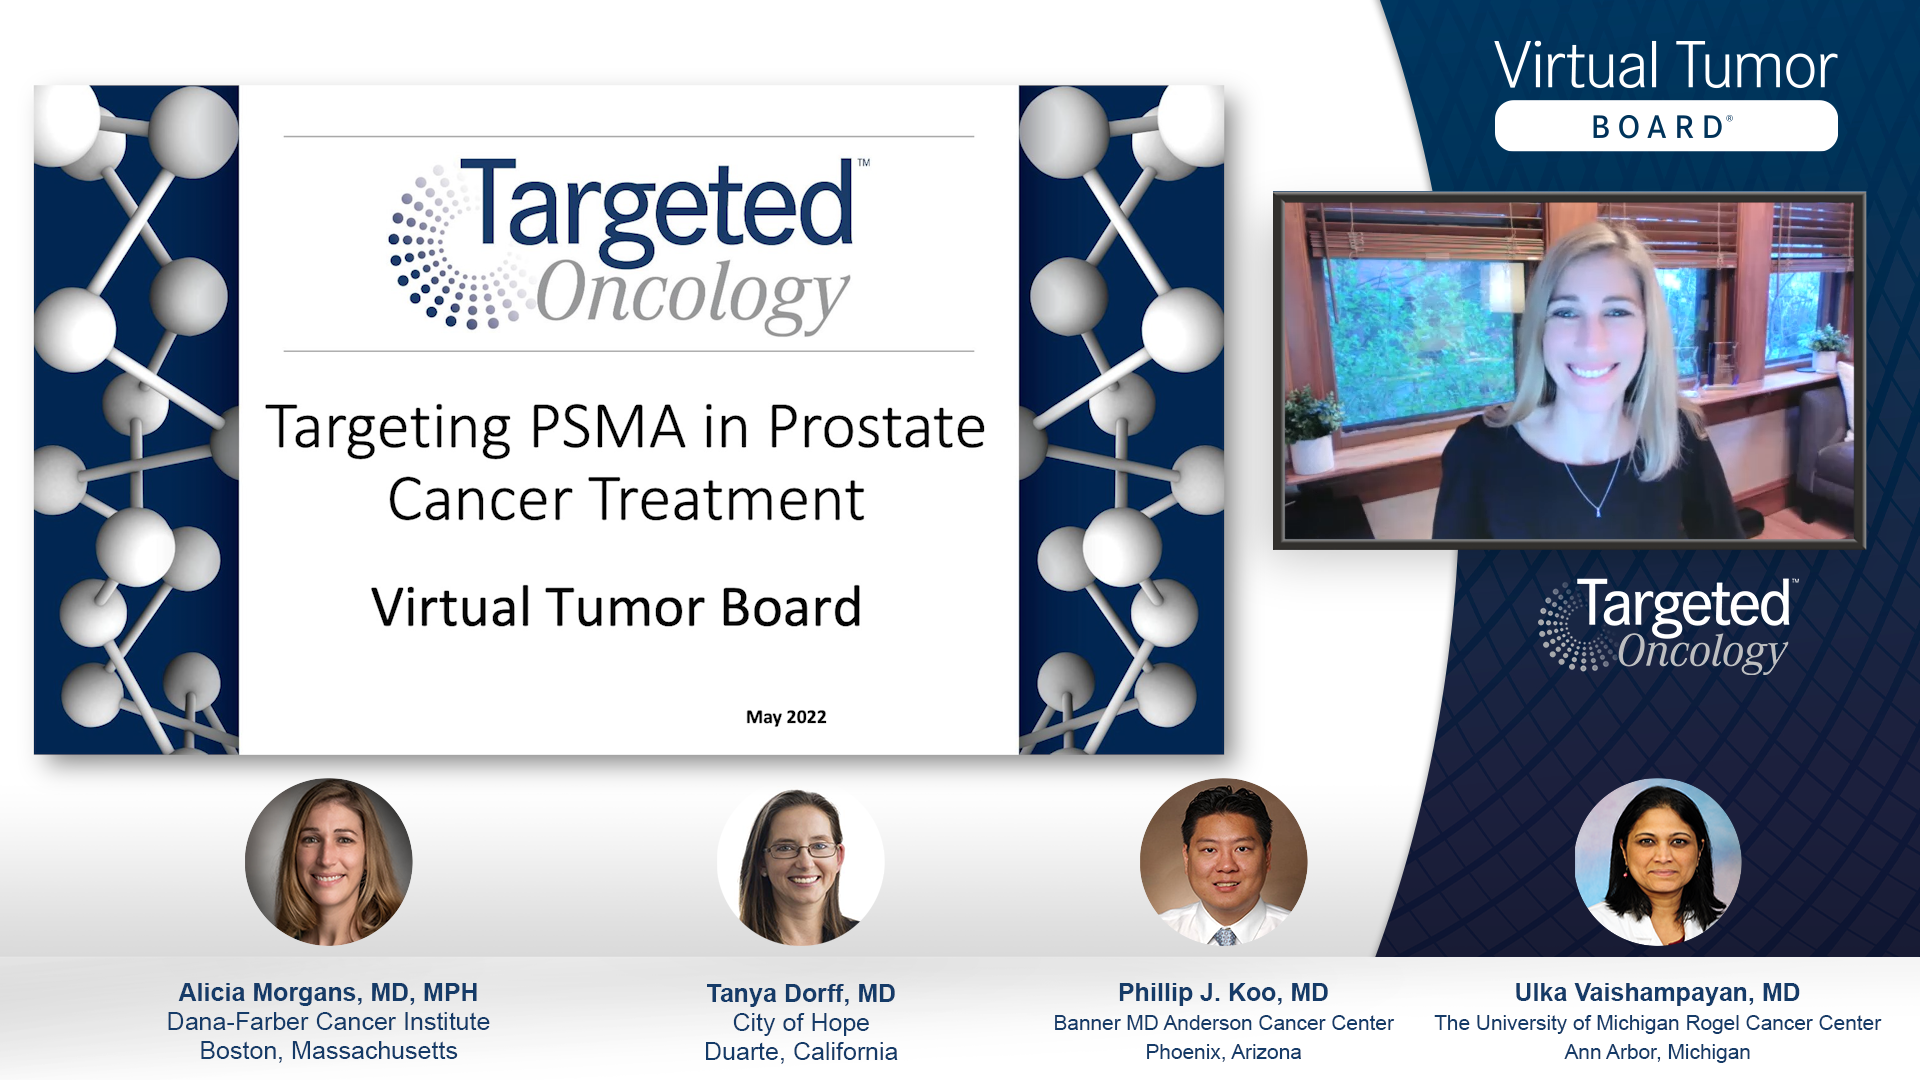 Experts on Prostate Cancer